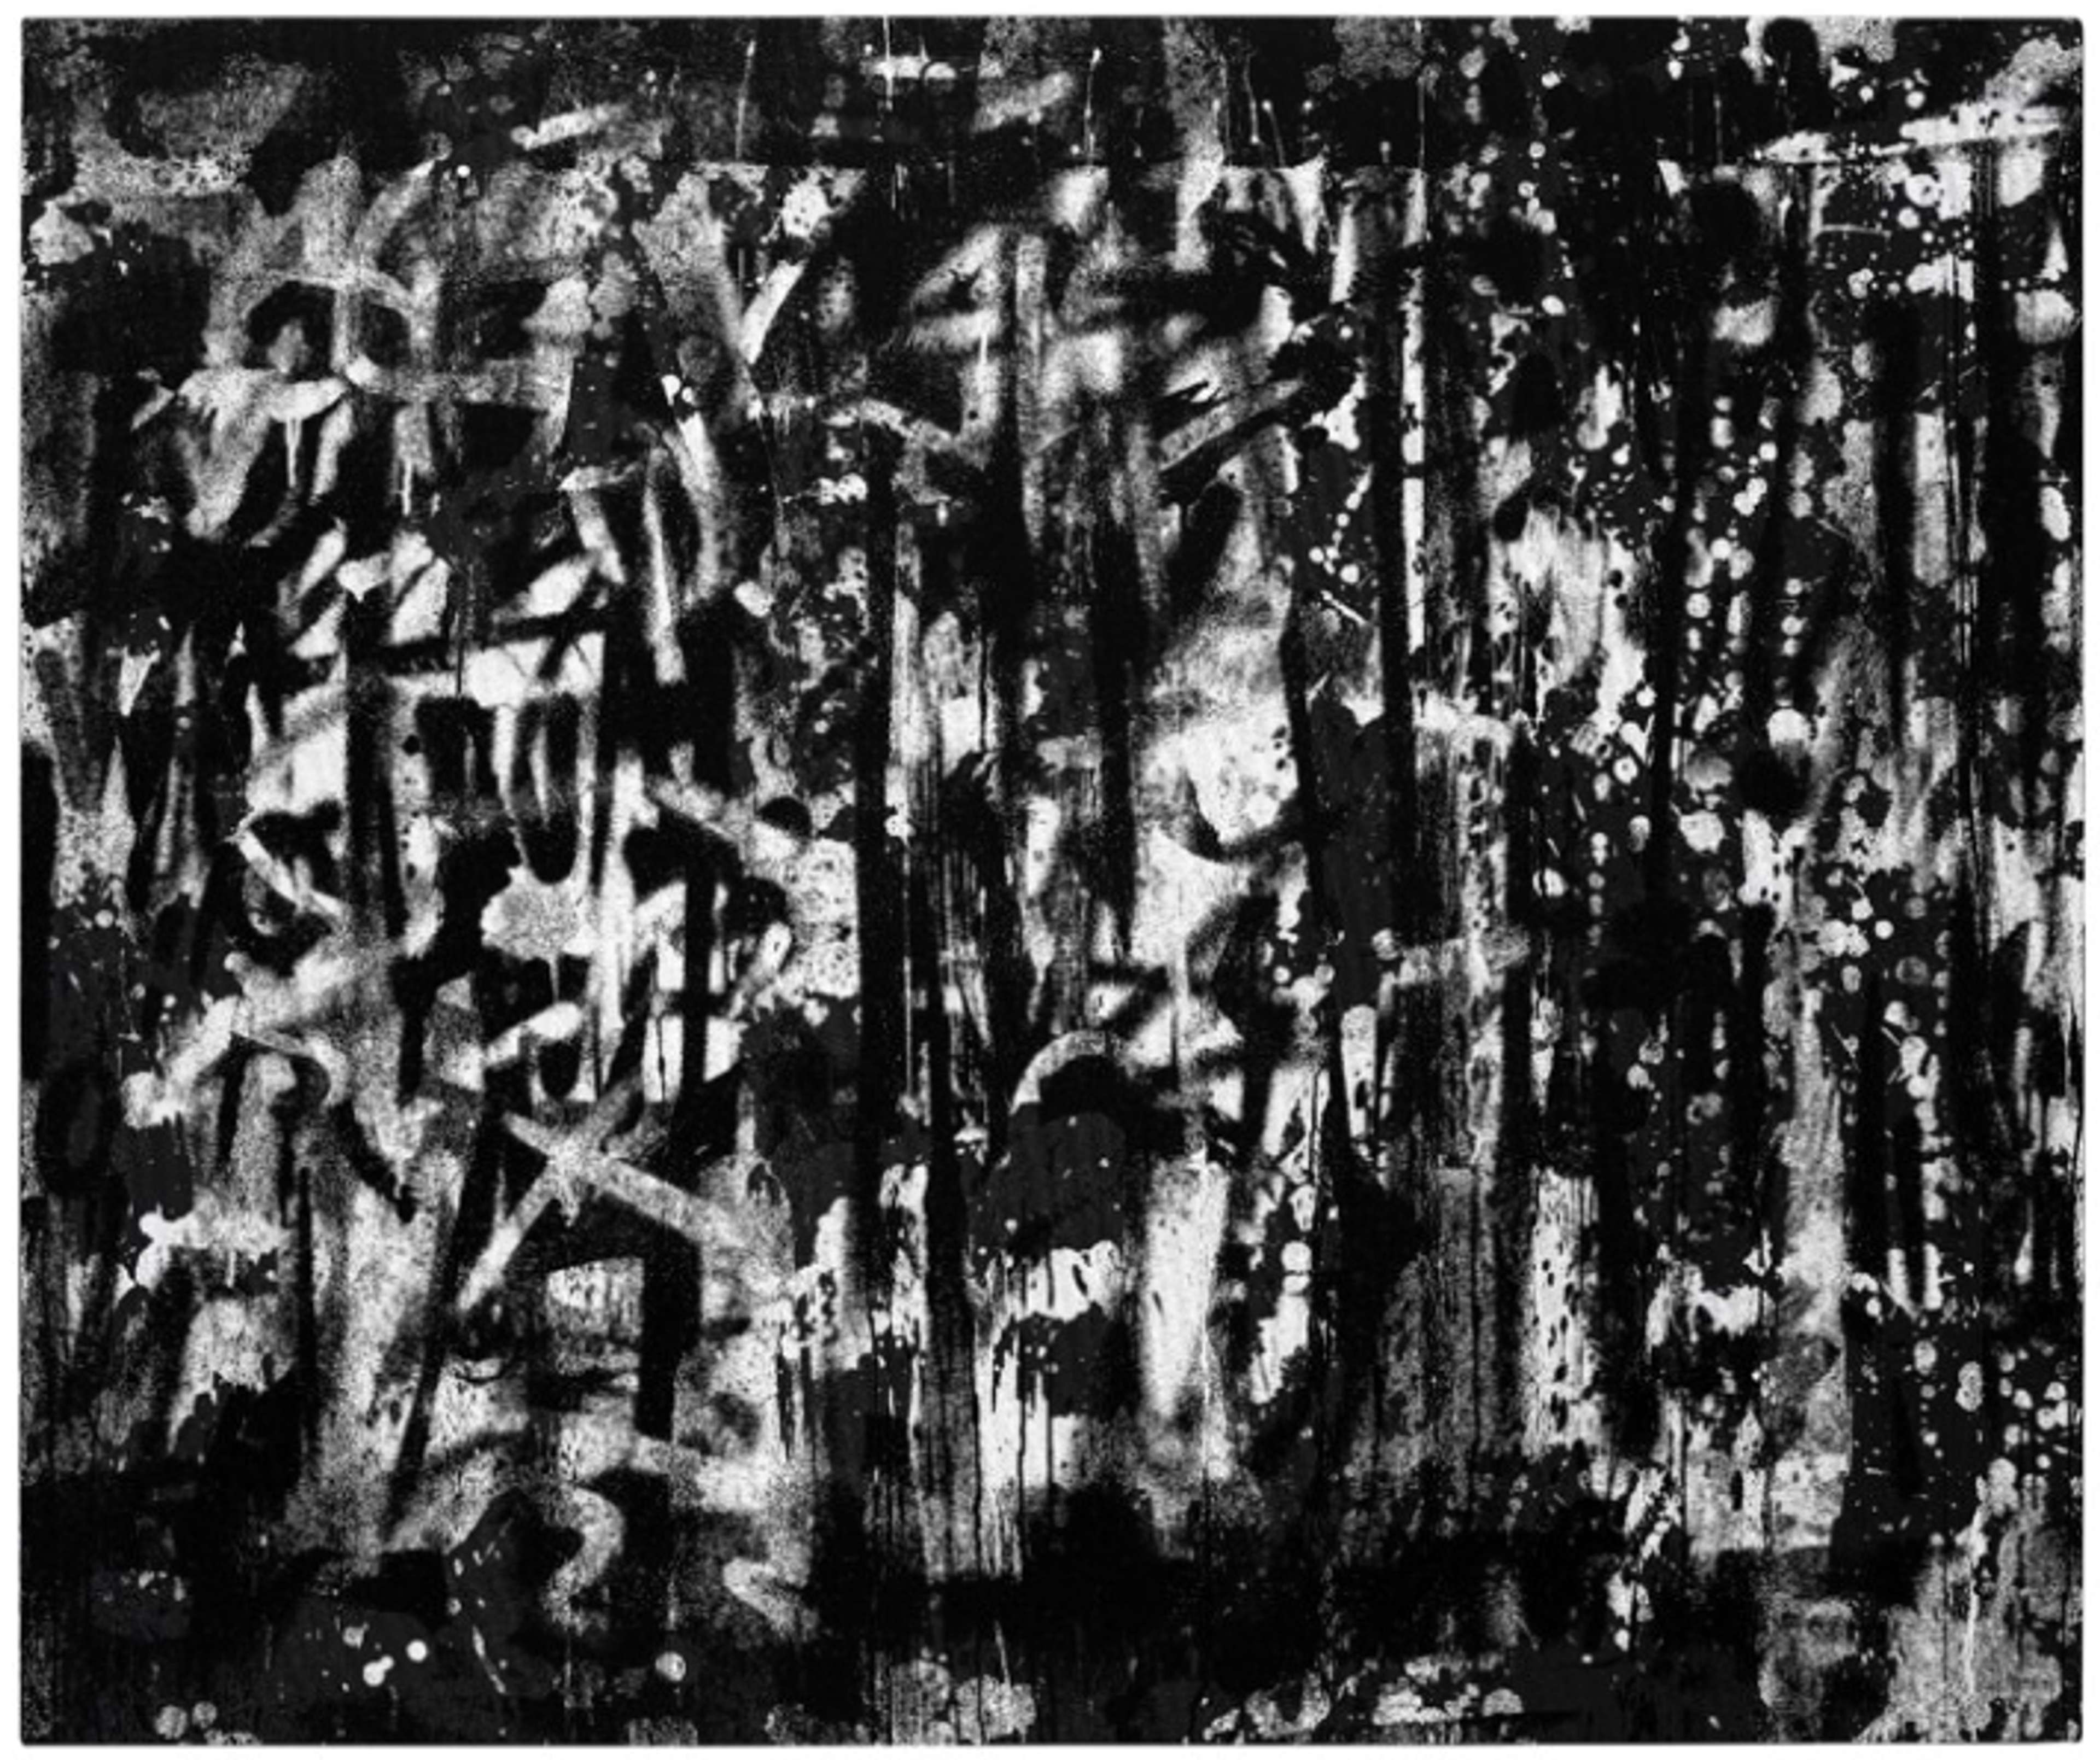 A large-scale canvas artwork by Adam Pendleton displaying monochromatic illegible words with scattered recognisable letters in disarray. The canvas is spray-painted and marked with gestural brushstrokes.